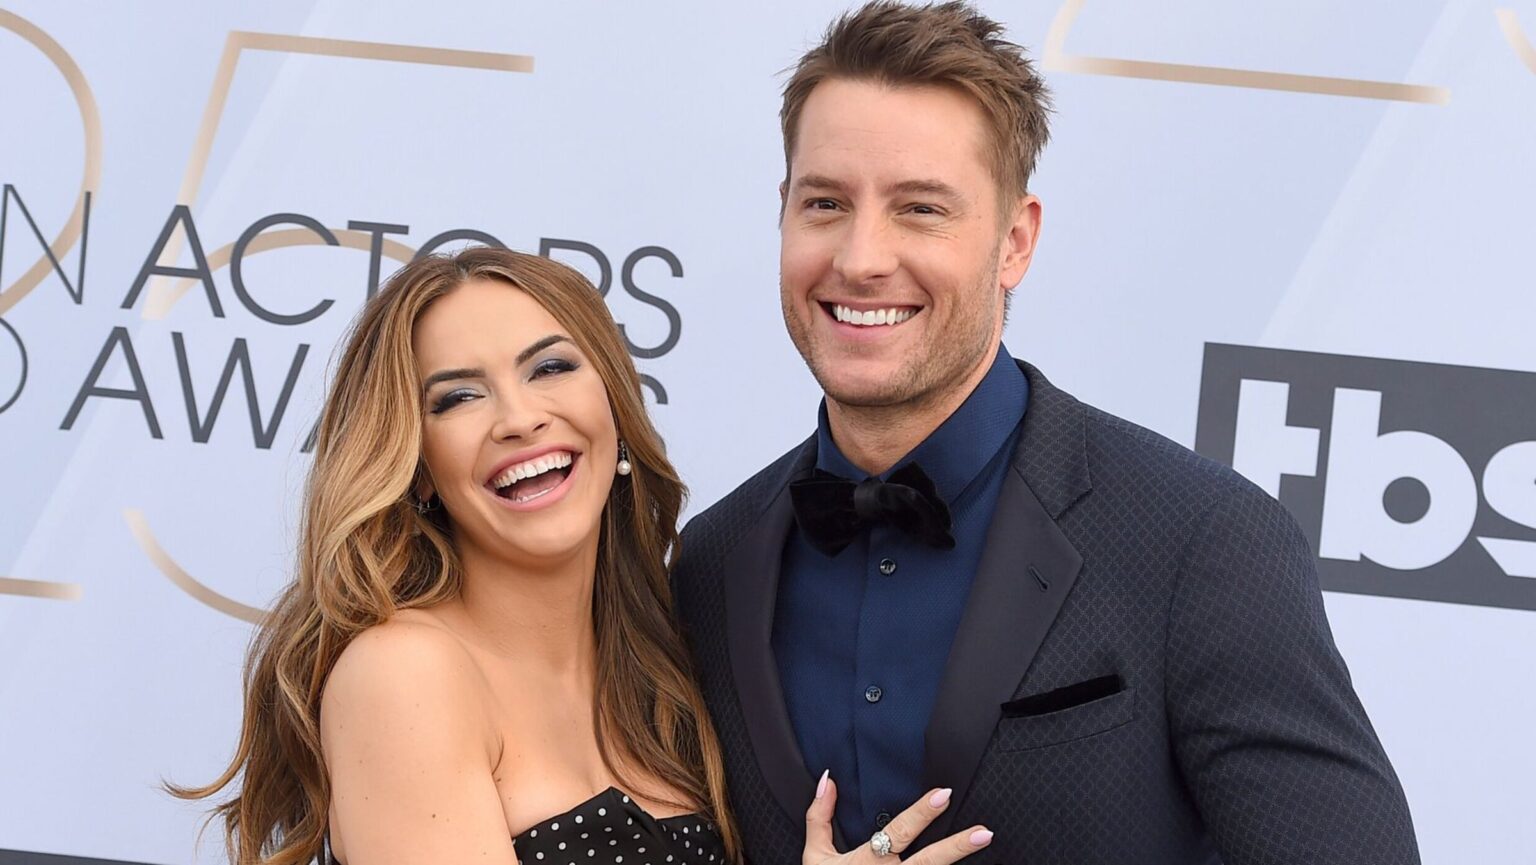 In 2019, 'This Is Us' star Justin Hartley abruptly filed for divorce from wife Chrishell Stause. Did Stause cheat on Hartley?